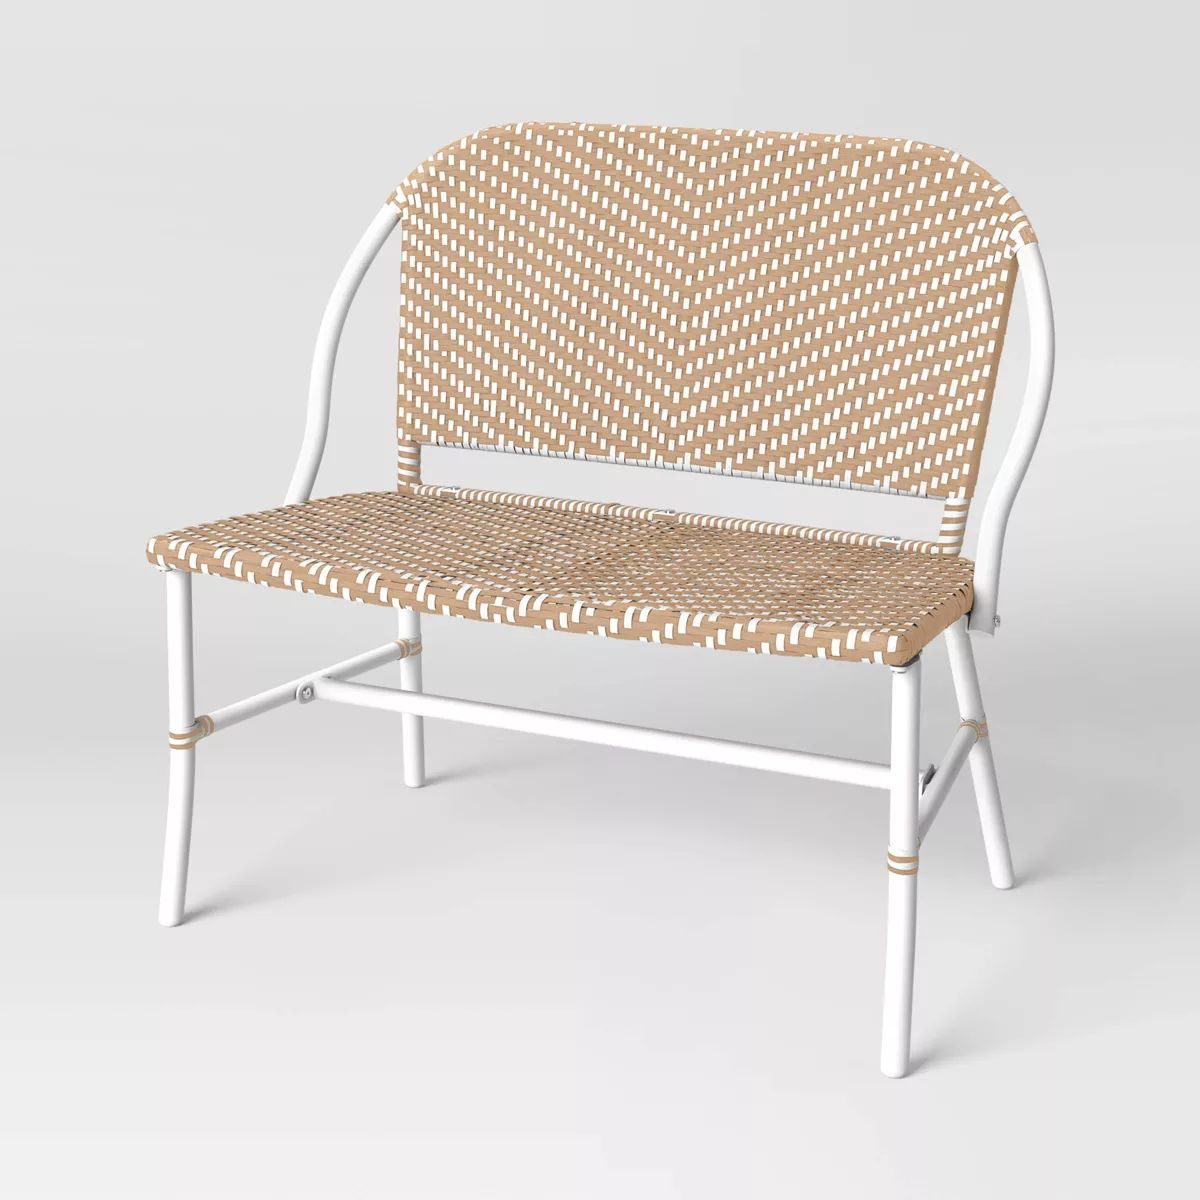 Suffield Wicker Patio Bench with Back - Threshold™ | Target